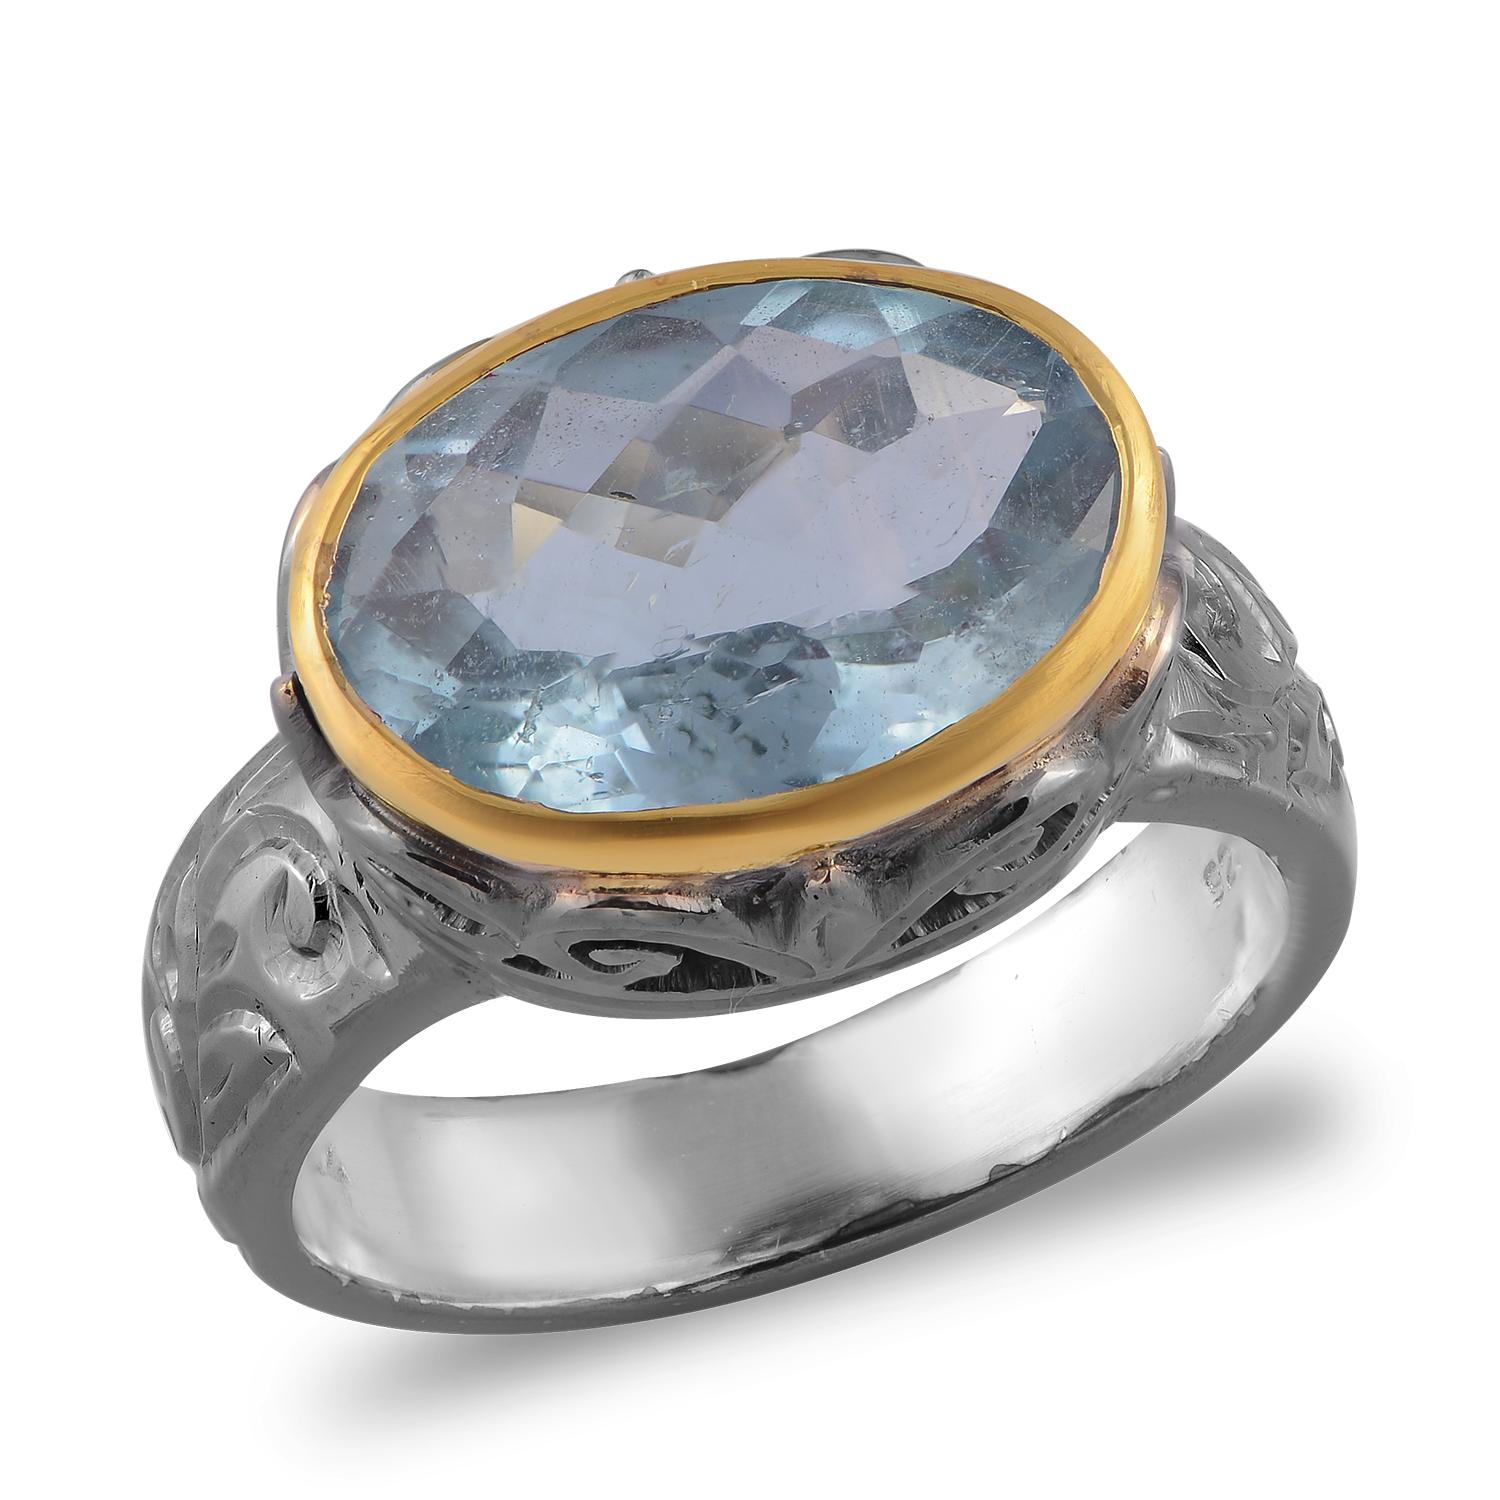 

This gorgeous one of kind ring has been handmade in our workshops. It features a stunning aquamarine, encased in 18ct gold and set on jaali work.  The shank, which is made of sterling silver is hand engraved and is oxidized.

Dimensions - 15mm x